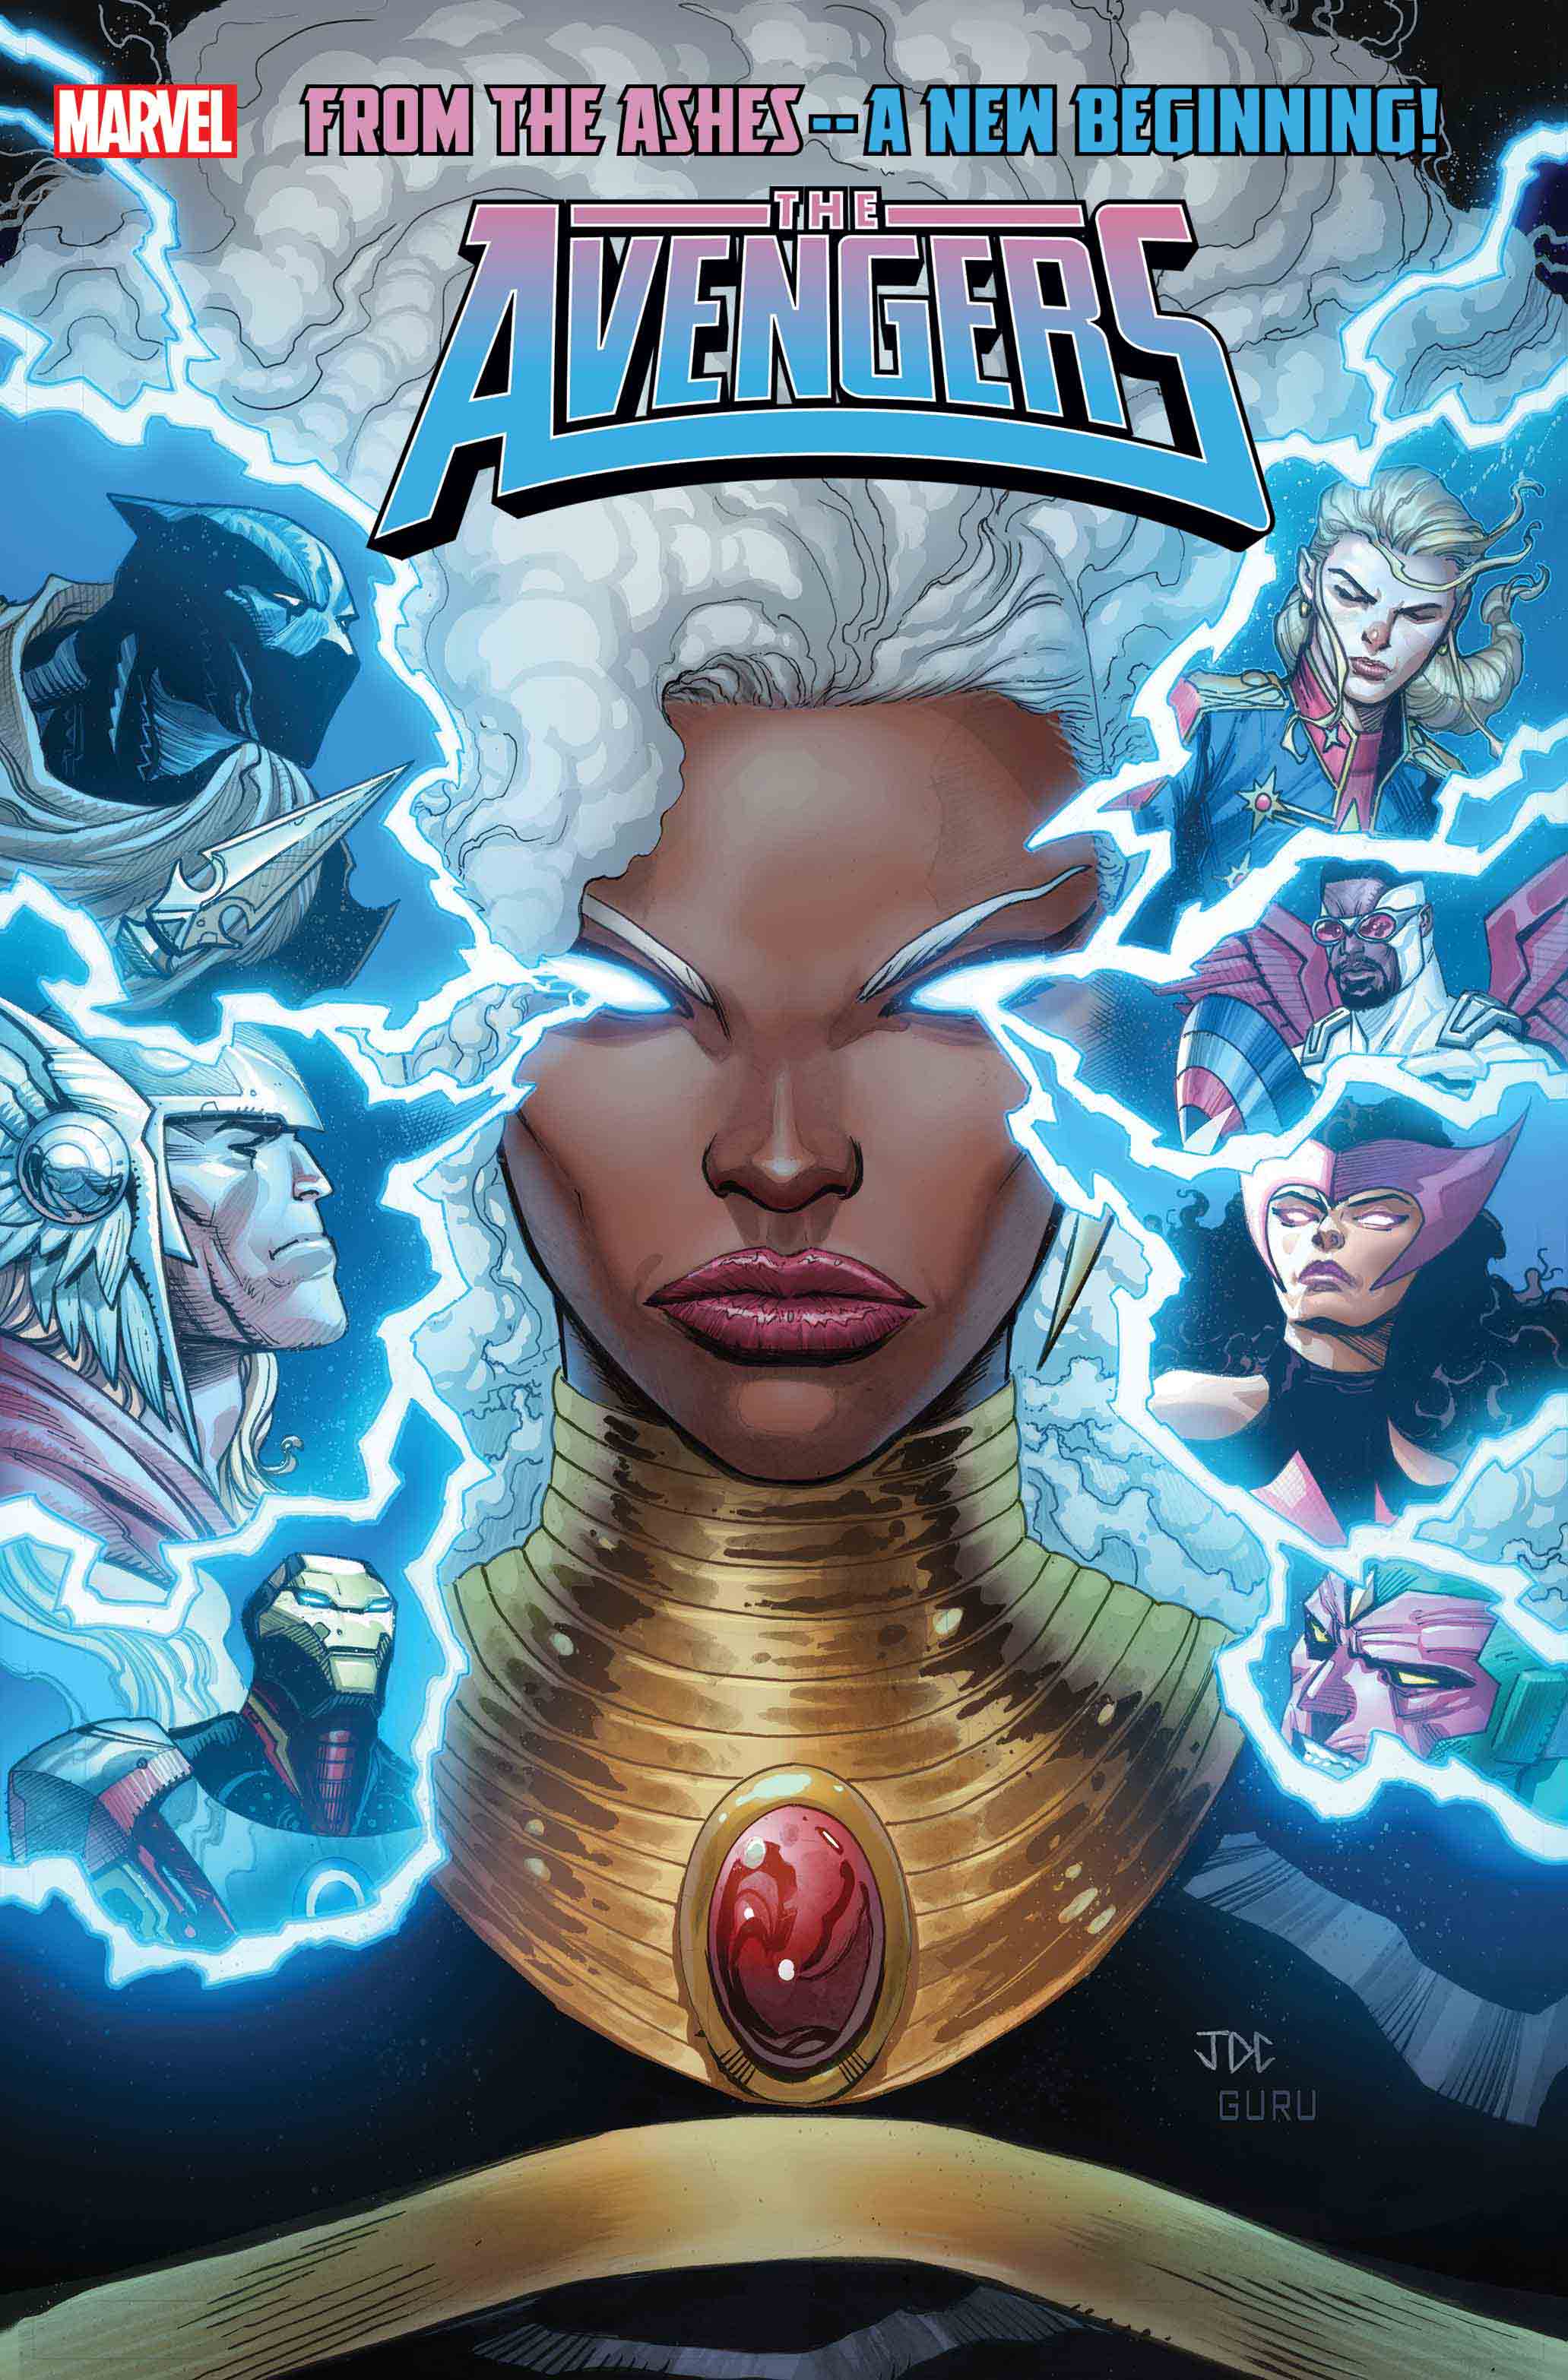 Storm in the cover for Avengers #17. Lightbolts flying out of her eyes as panel dividers to the left and right of the team. Panther, Thor, and Iron Man on the left. Captain Marvel, Captain America, Wanda, and Vision to the right.